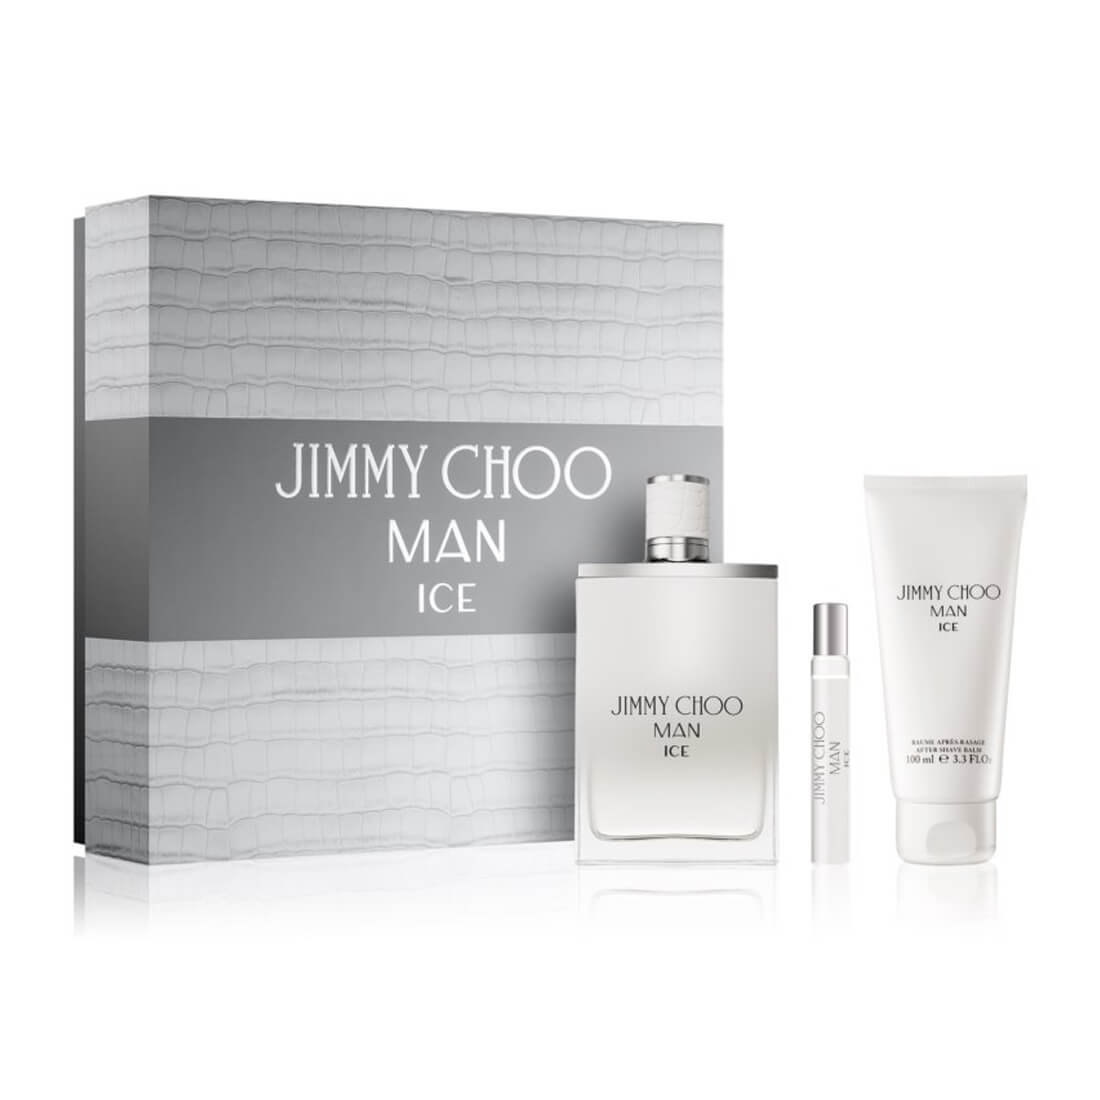 Jimmy Choo Man Ice Perfume Gift Set For Men EDT 100ml + EDT 7.5ml + Aftershave Balm 100ml